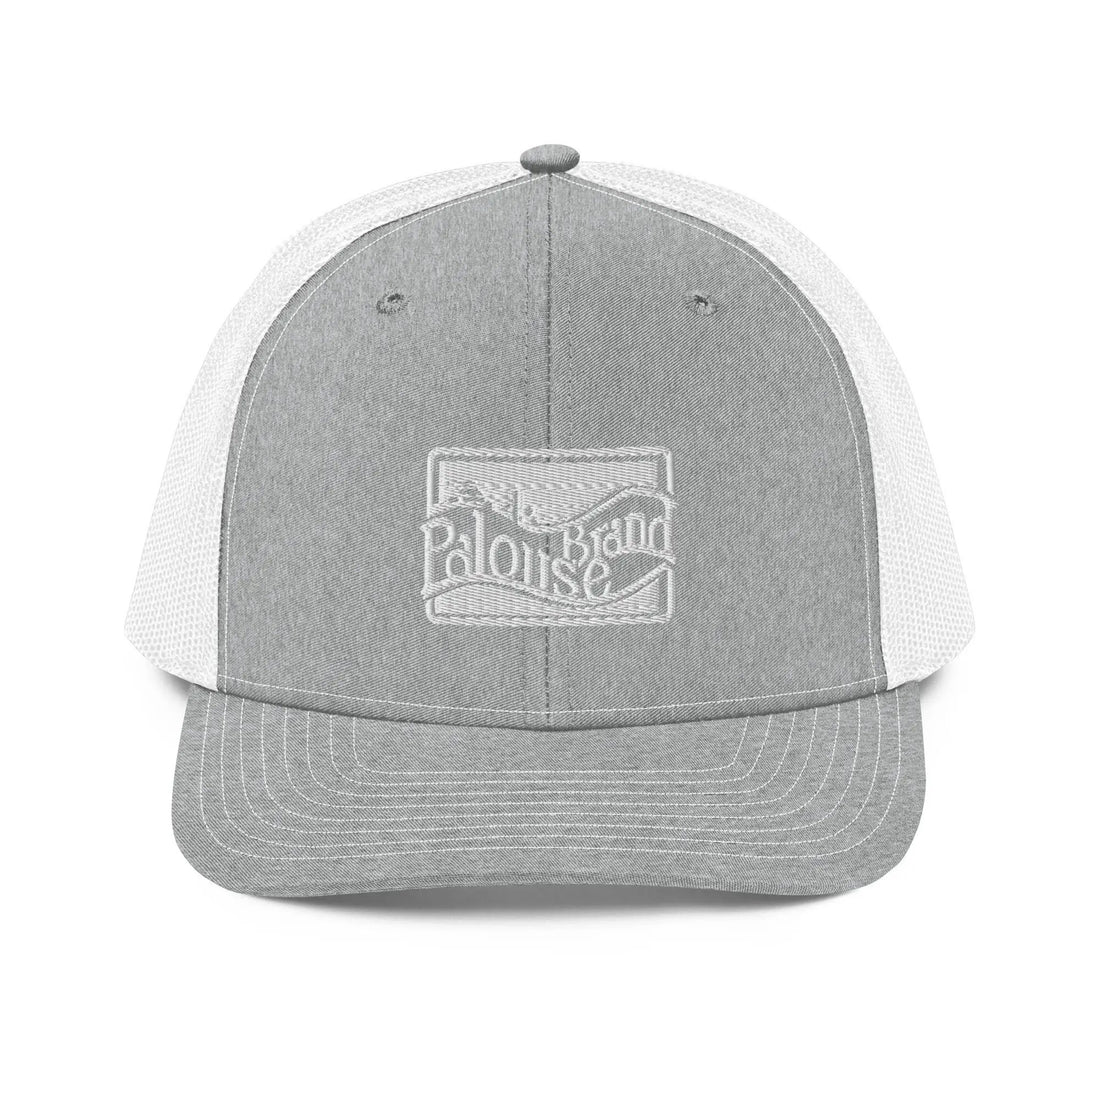 a gray and white trucker hat with a white patch on the front of it